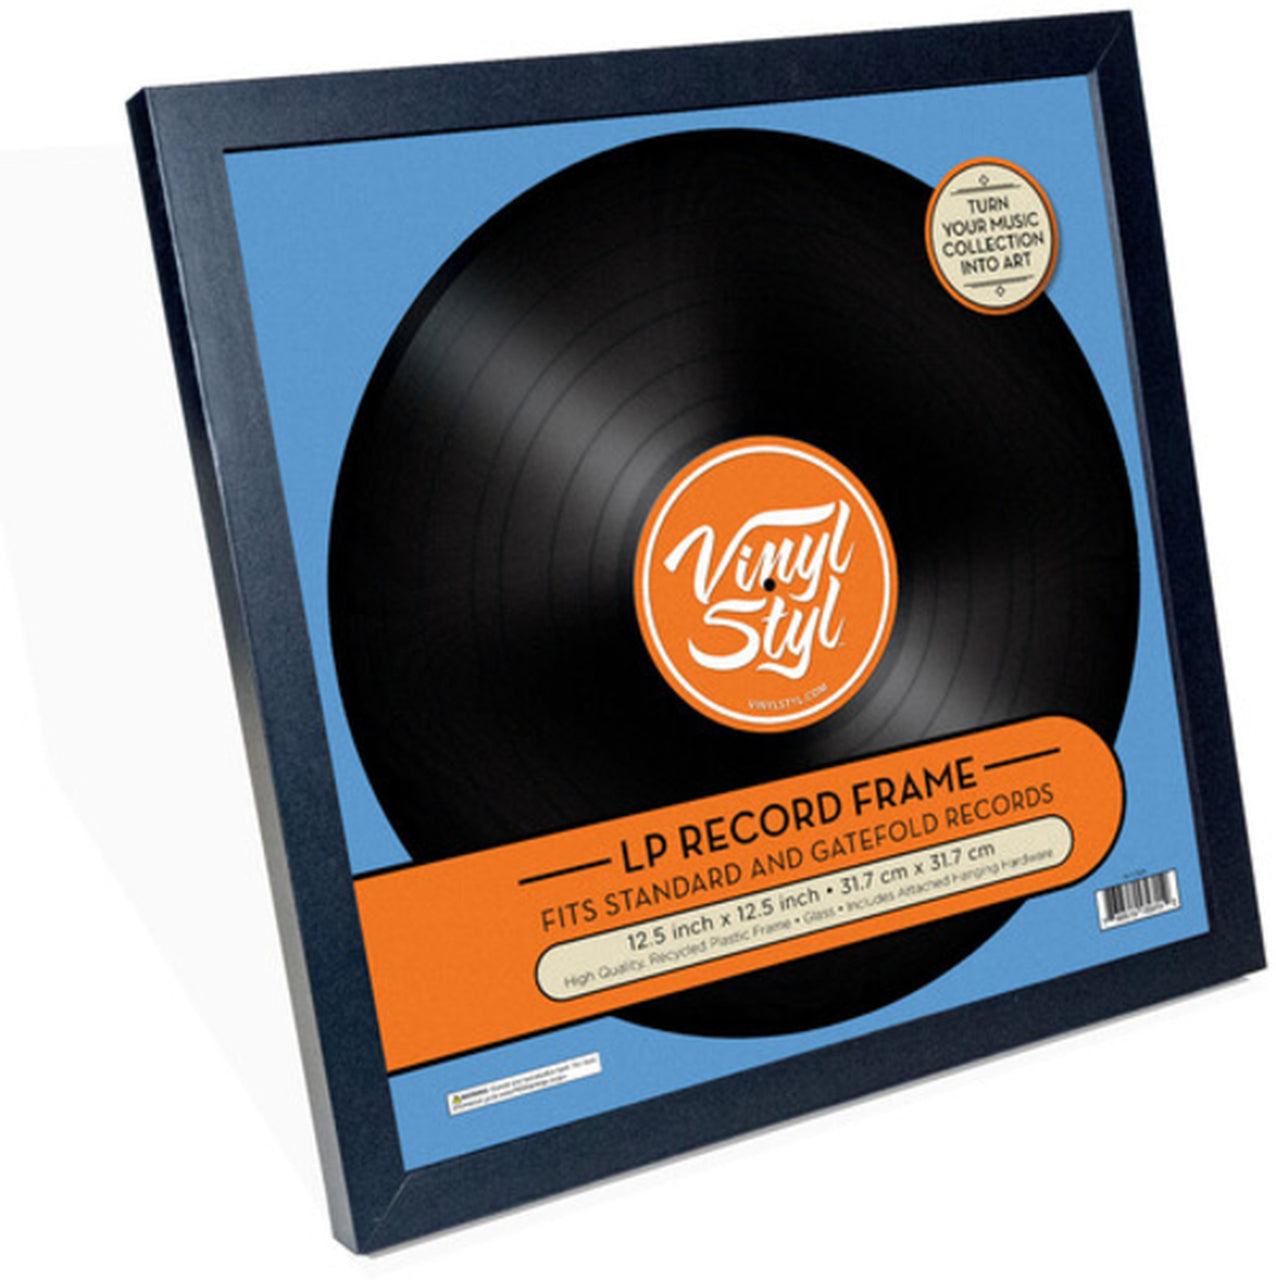 Vinyl Styl™ 12" Record Frame for LPs and Picture Discs